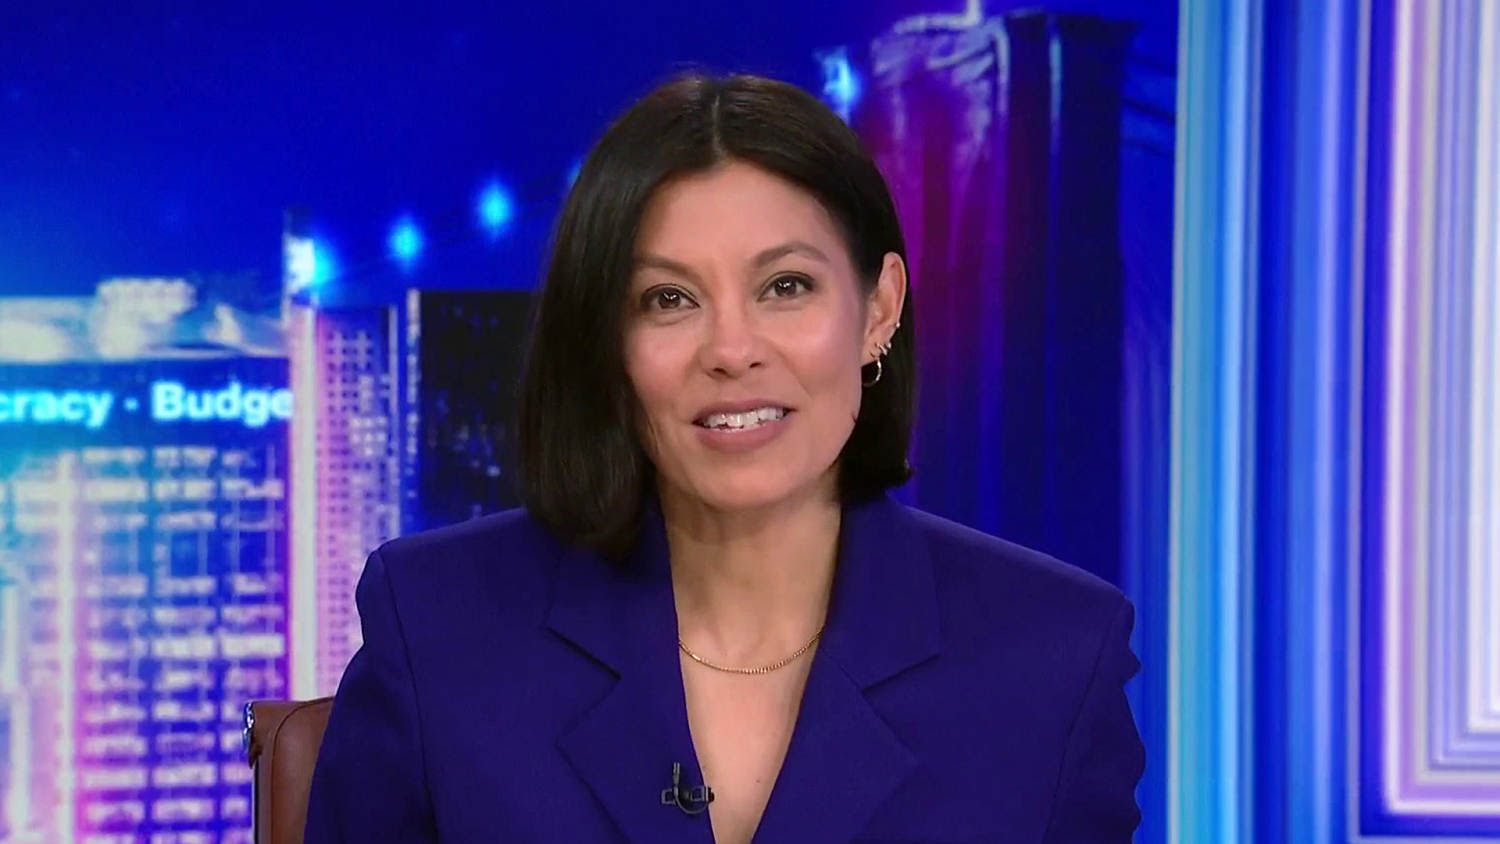 Watch Alex Wagner Tonight Highlights: May 22